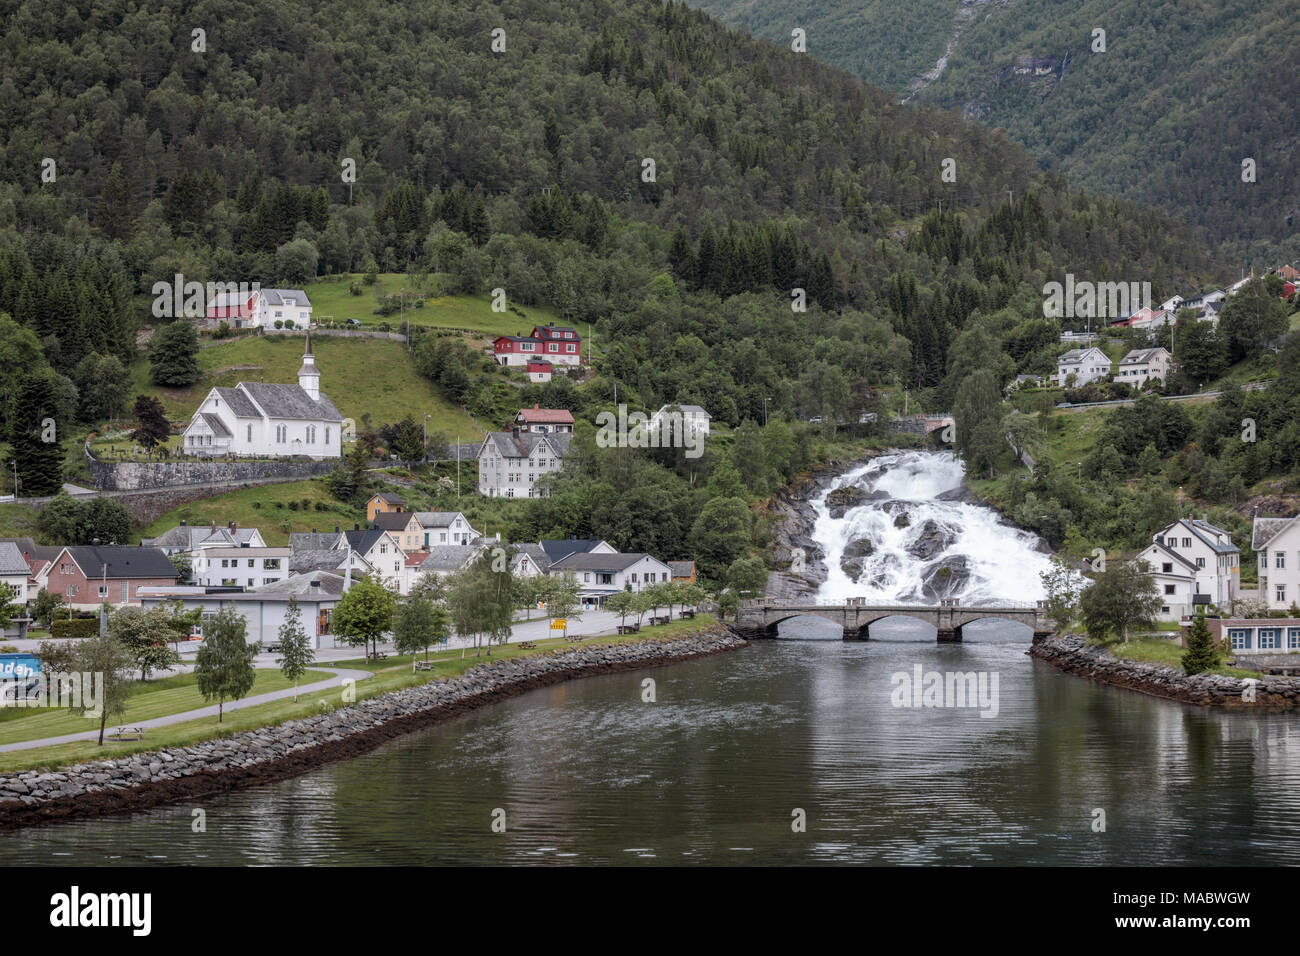 Hellesyltfossen, a beautiful waterfall that divides the village of Hellesylt (Norway) into two parts. Stock Photo